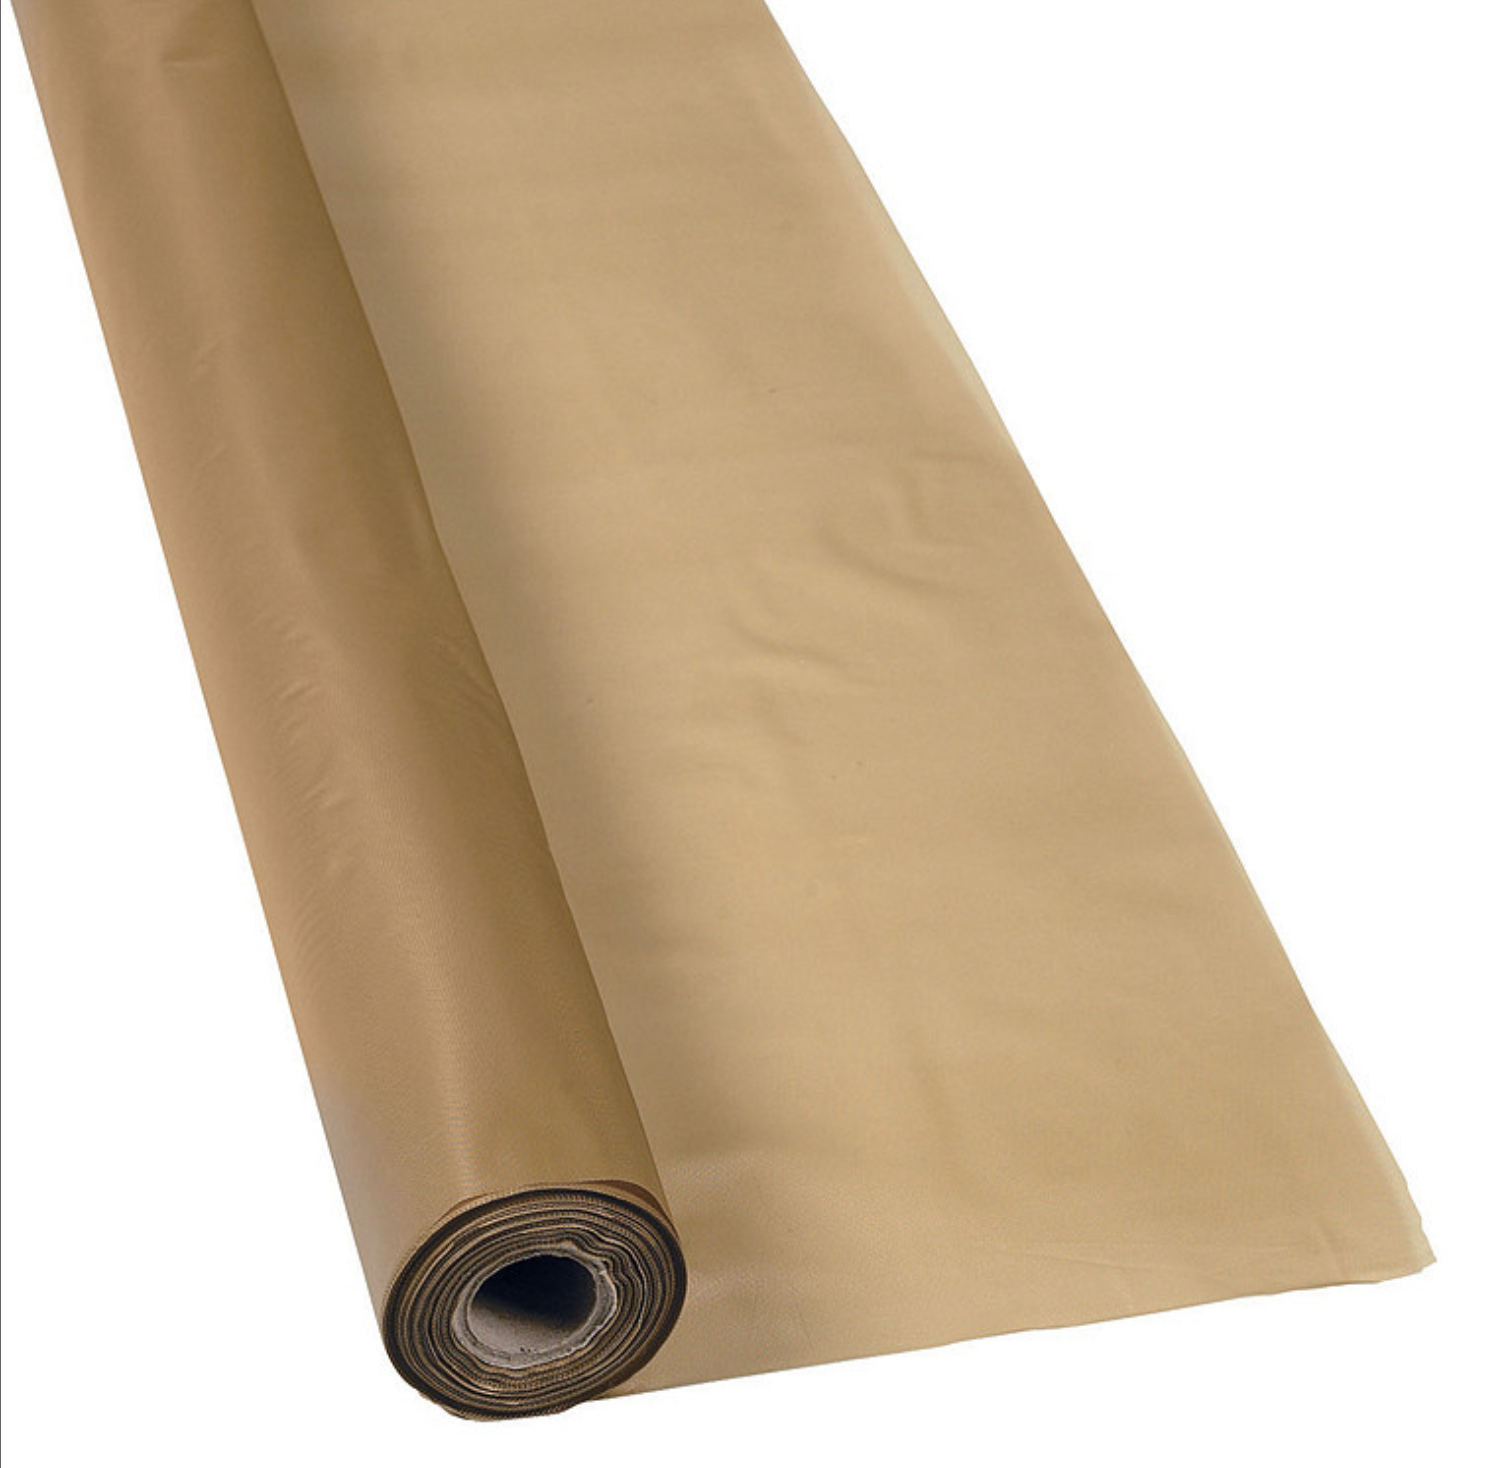 Black Velvet Plastic Banquet Roll 40X100' – The Paper Store and More